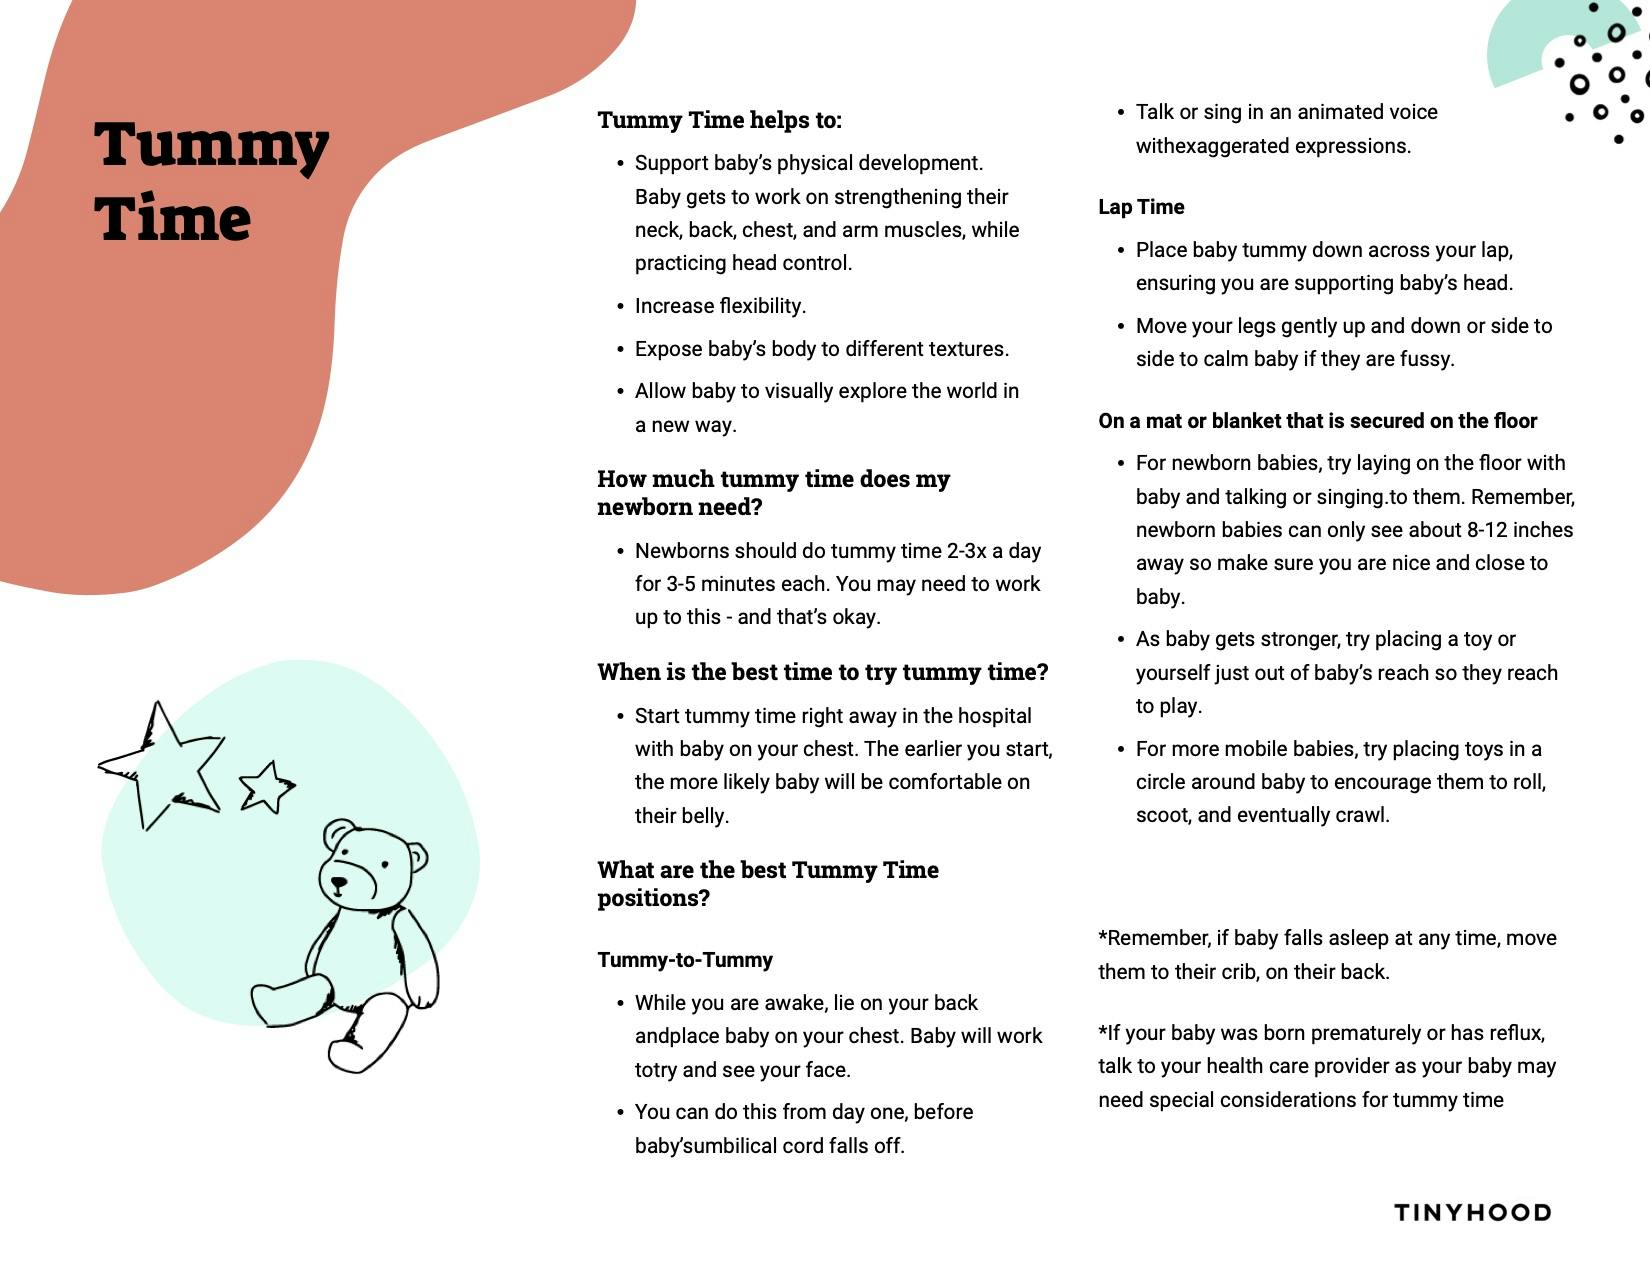 Preview image of Handout: A Guide to Tummy Time